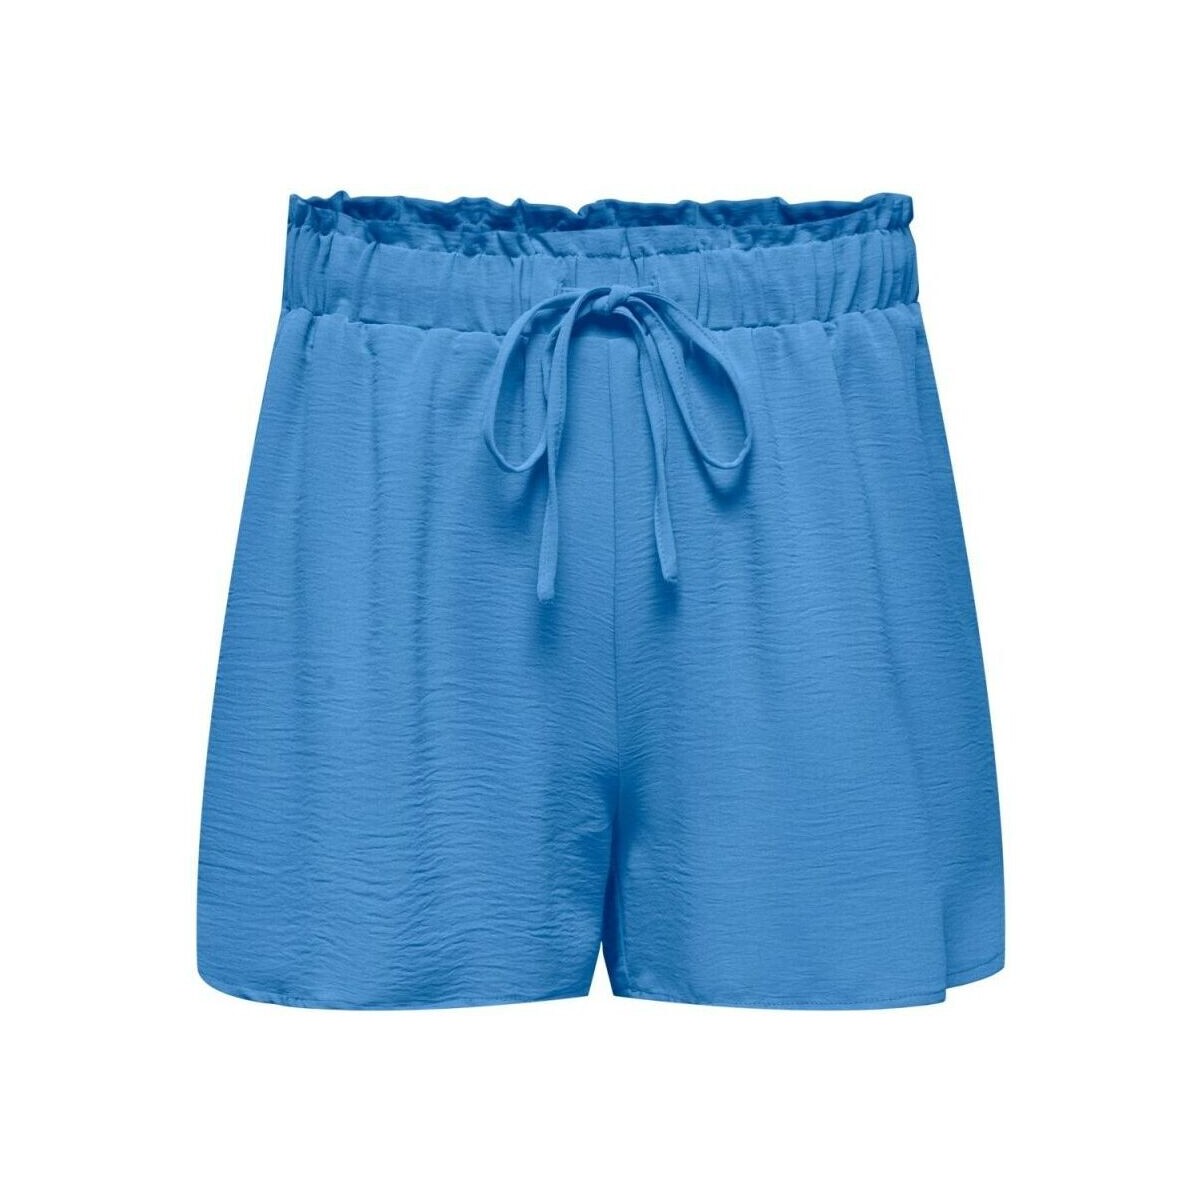 Textil Mulher Shorts / Bermudas Only 15250165 METTE-PROVENCE Azul